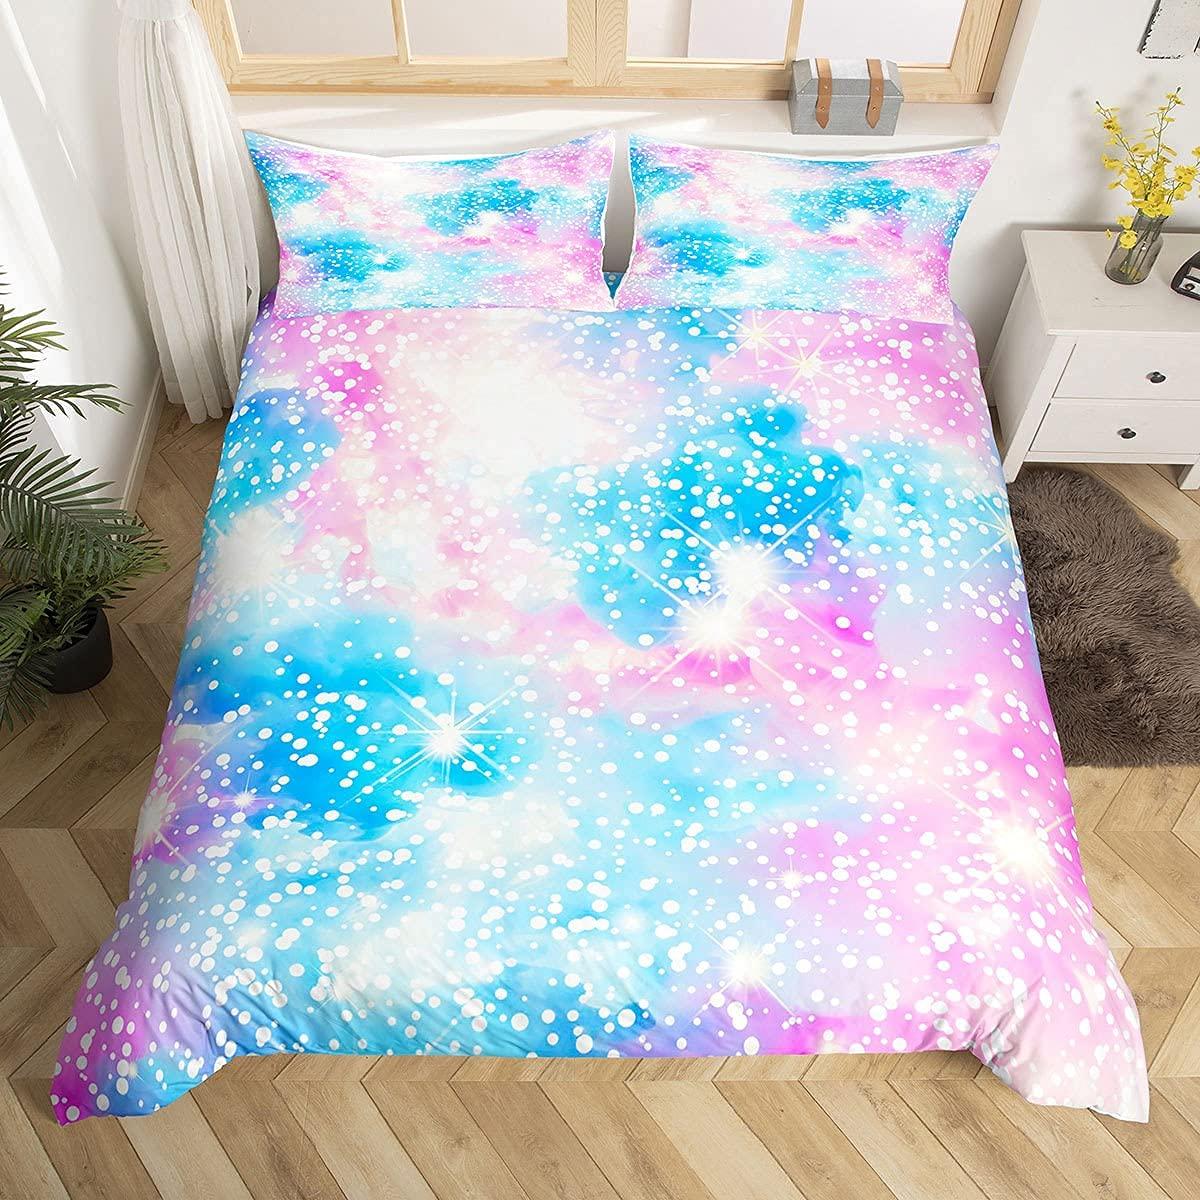 Loussiesd Fantasy Girly Bedding Set Decortaive 3 Pcs Shiny Blue Pink Purple Pastel Colors Duvet Cover for Girls Cute Bling Galaxy Print Bedspreads King Comforter Cover for Kids Teens Colorful